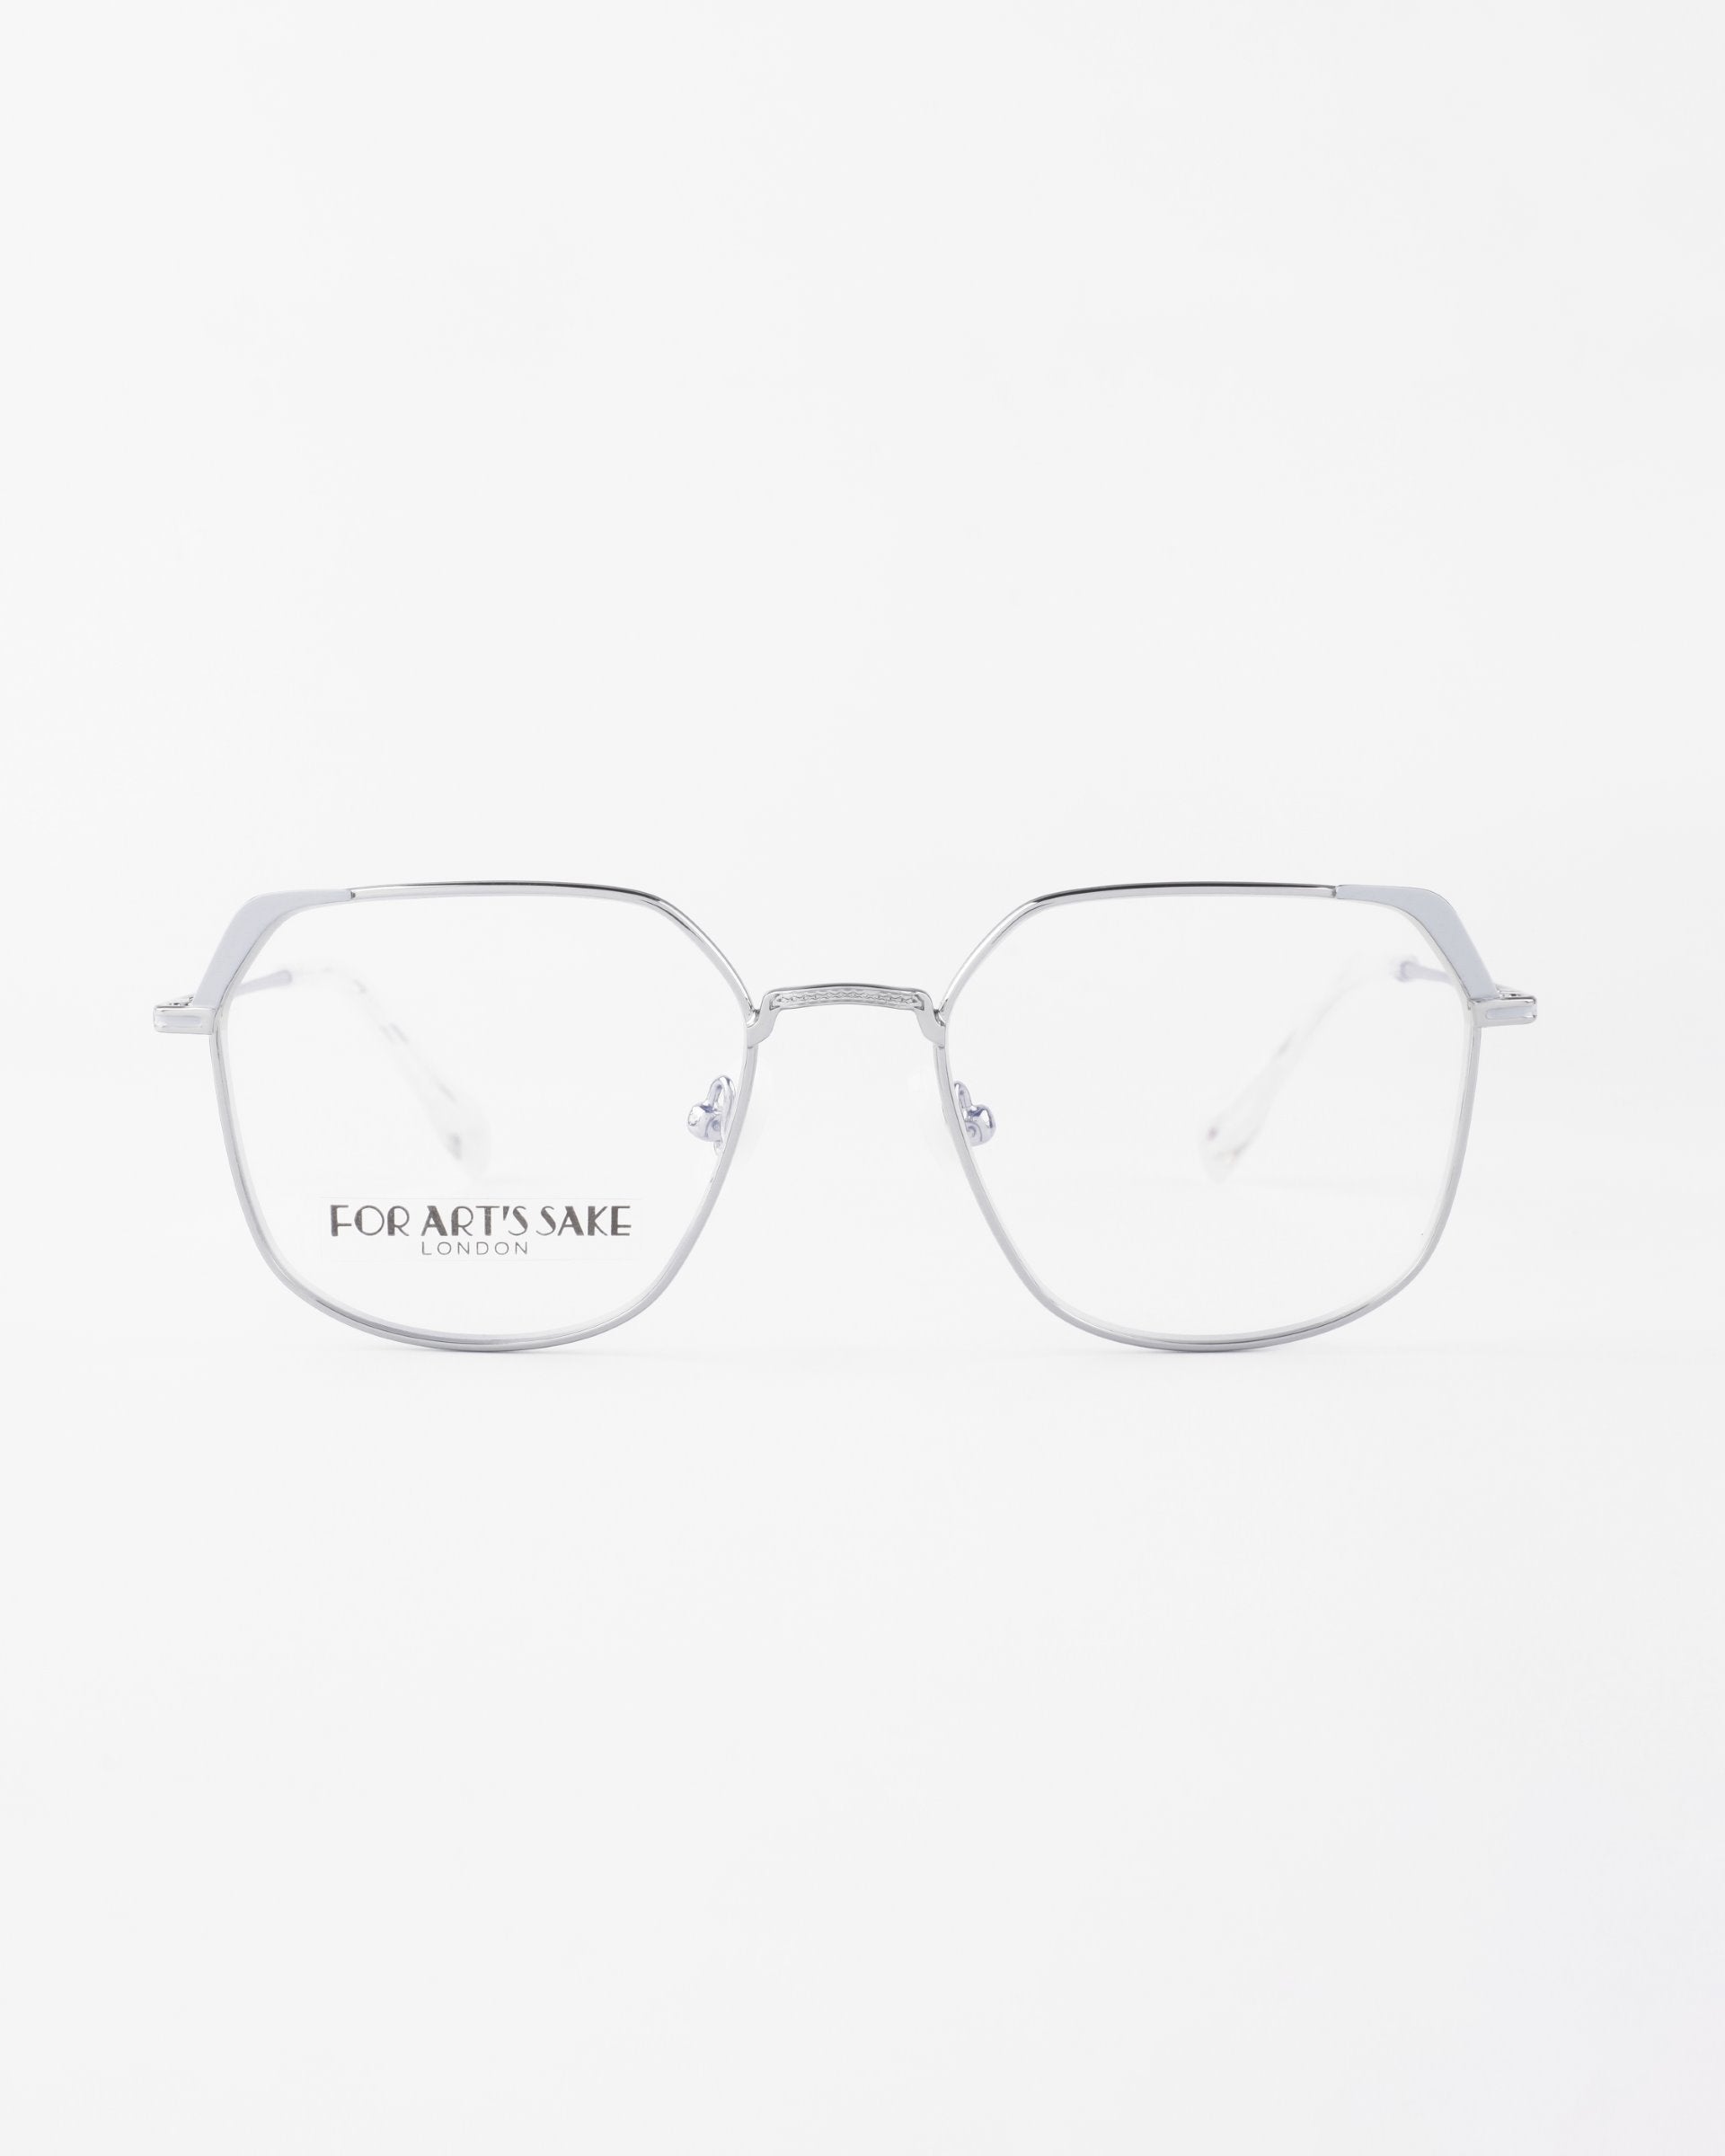 A pair of Godiva with metal frames and clear lenses featuring a blue light filter. The frames are thin and minimalist, with slightly rounded square shapes. The words &quot;FOR ART&#39;S SAKE LONDON&quot; are printed on the left lens. The background is plain white.